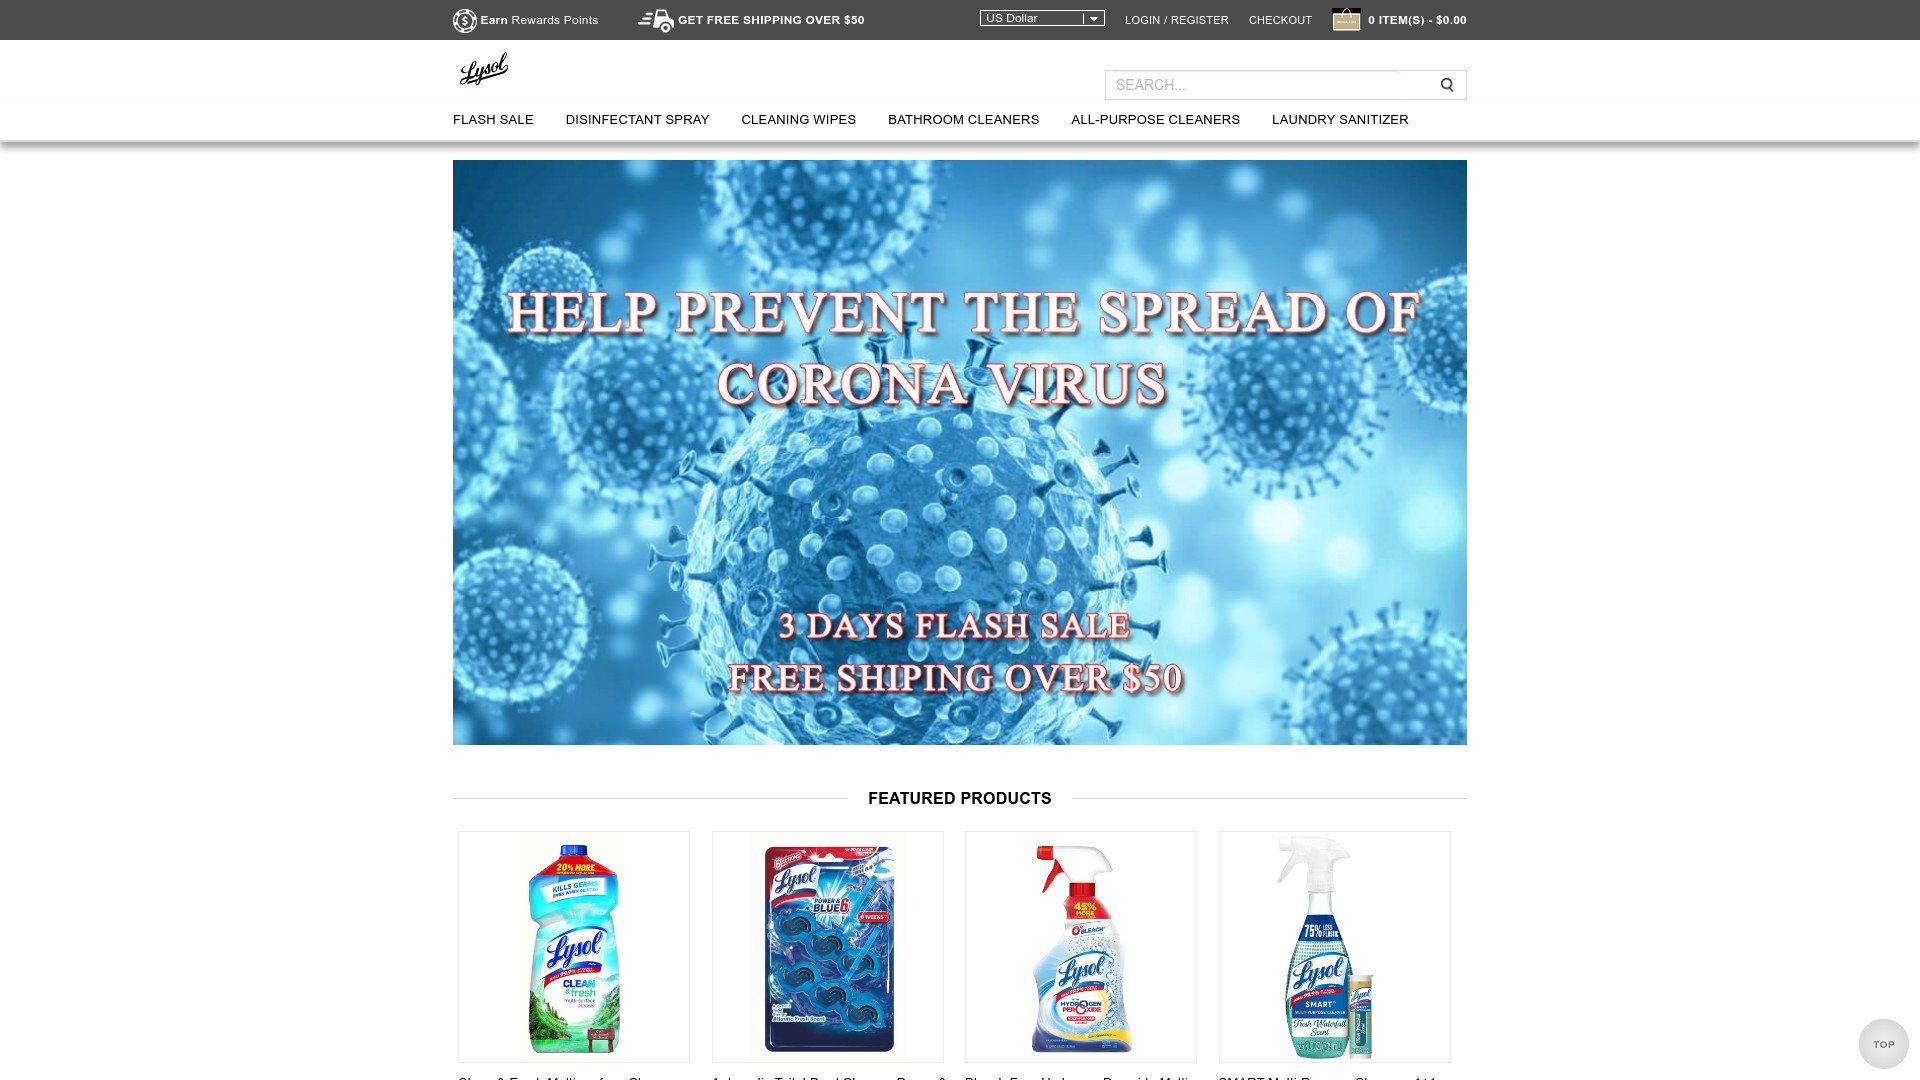 Is Prolysol a Scam? Review of the Online Store